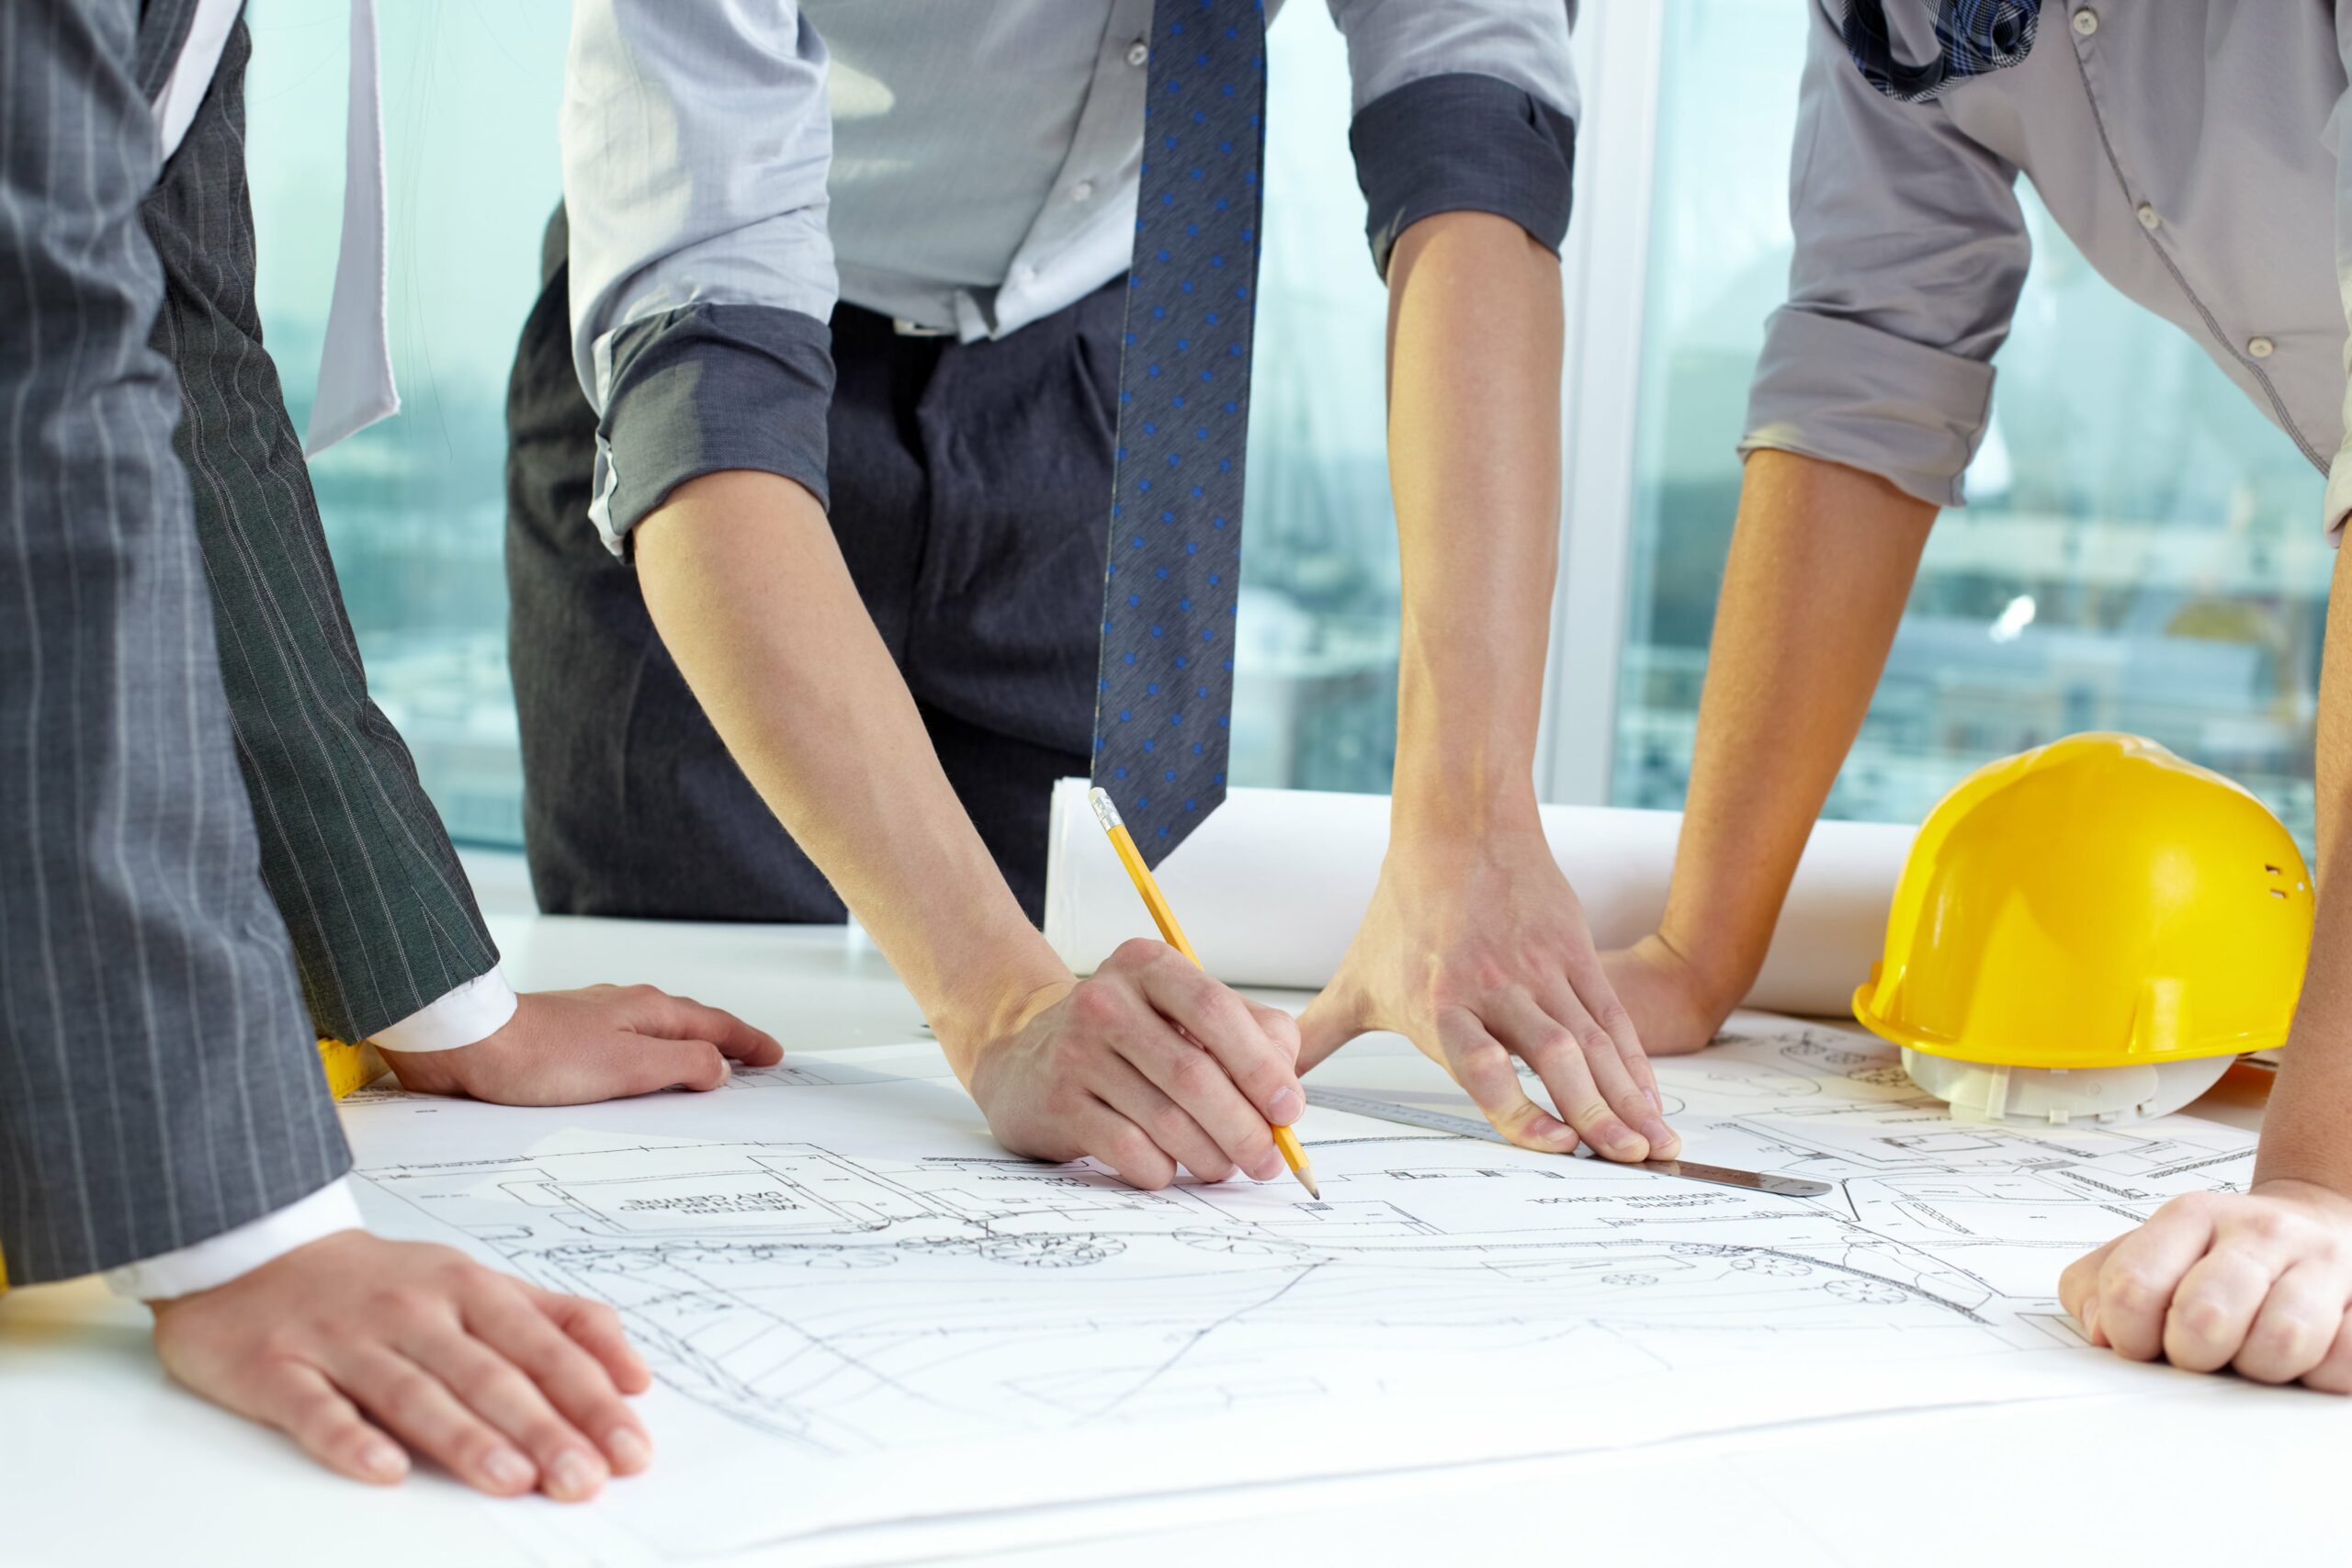 Civil Engineering is a Career that You Should Consider.